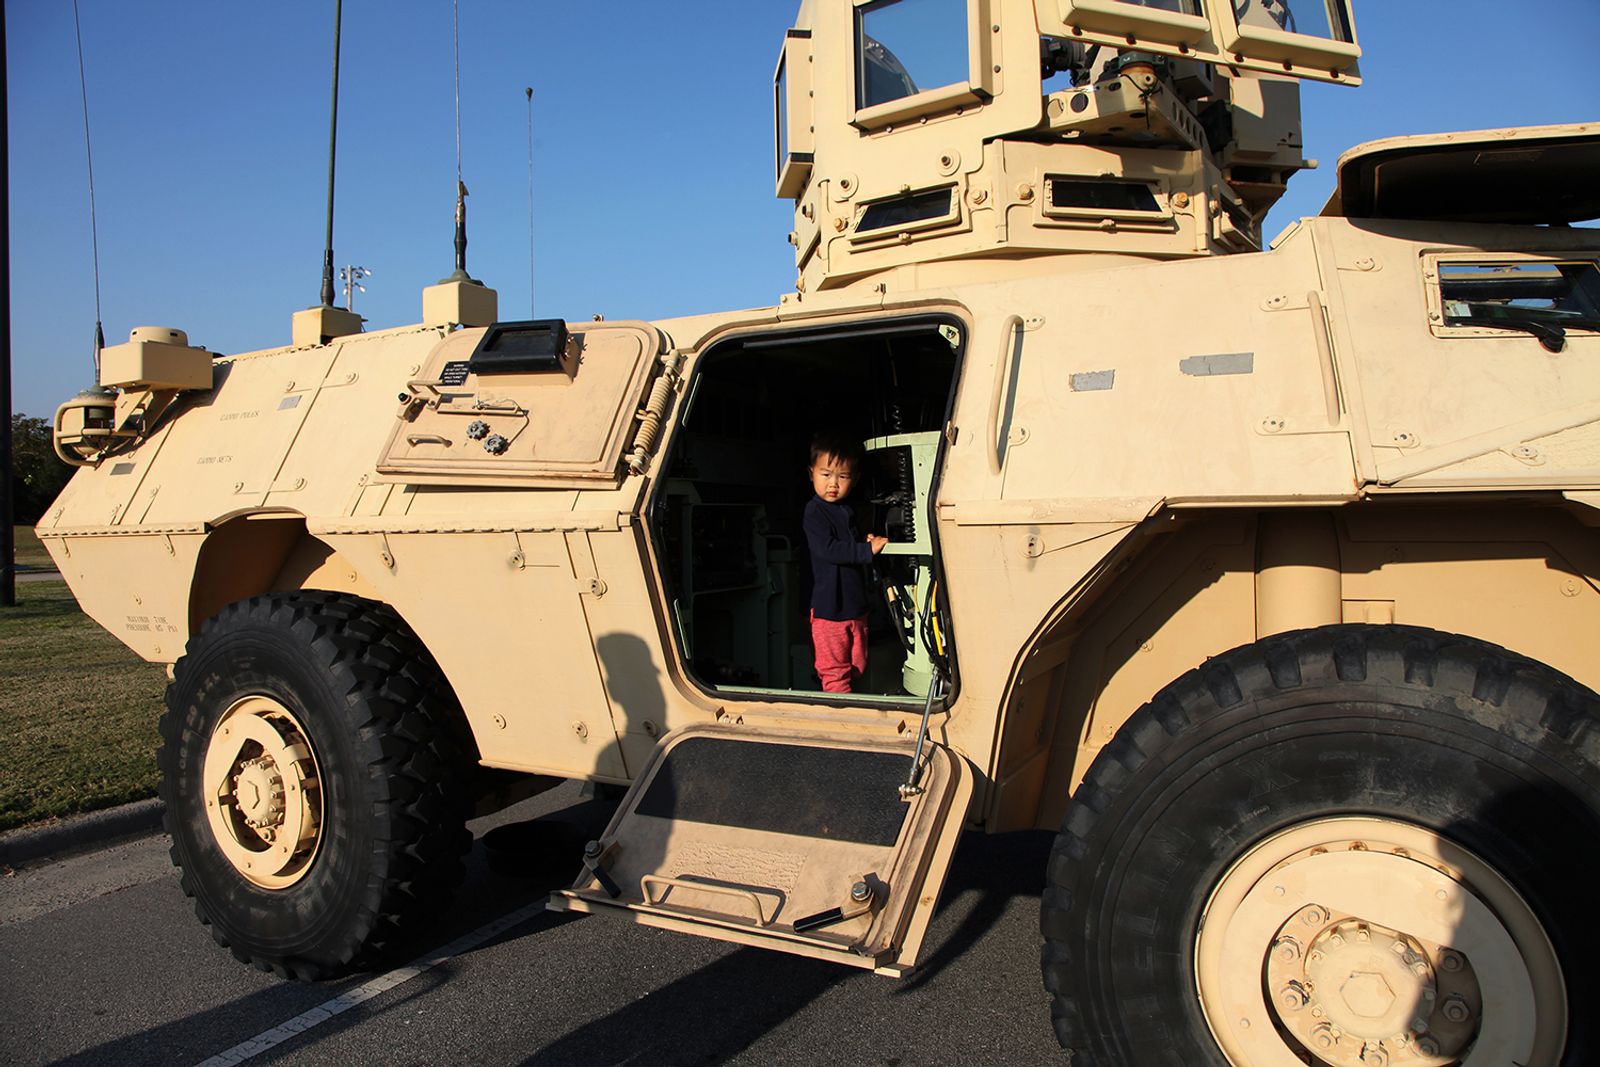 © Arin Yoon - Teo climbs in an 1117 Armored Security Vehicle during a family day visit to Fort Stewart, Georgia, in 2016.